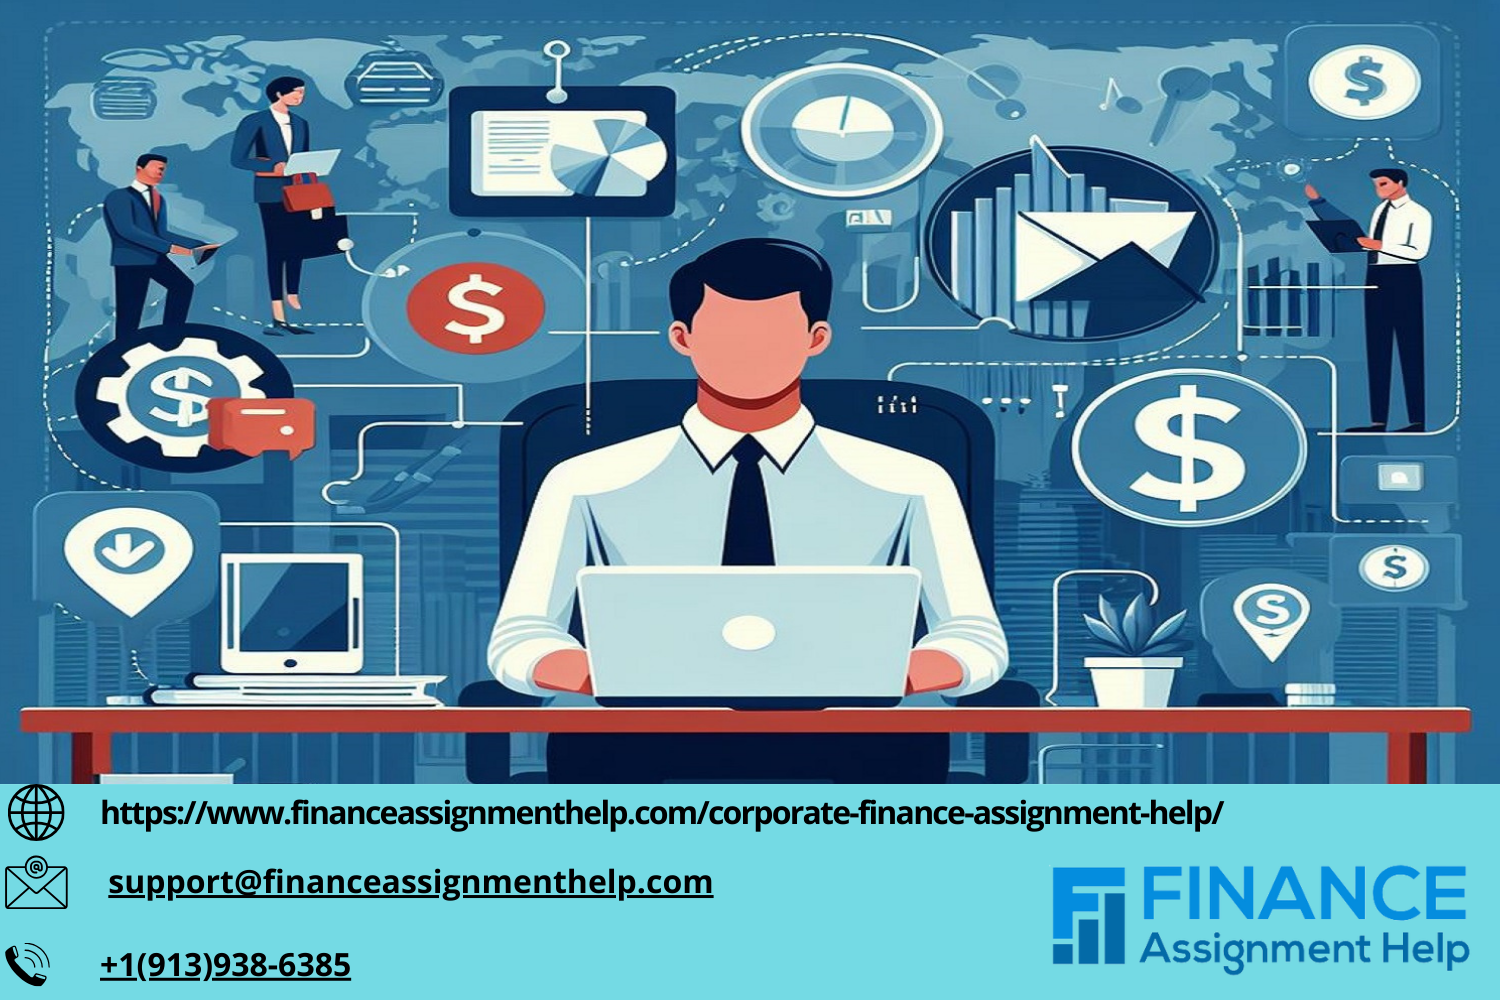 Cracking Corporate Finance: Top Websites to Guide You to an A